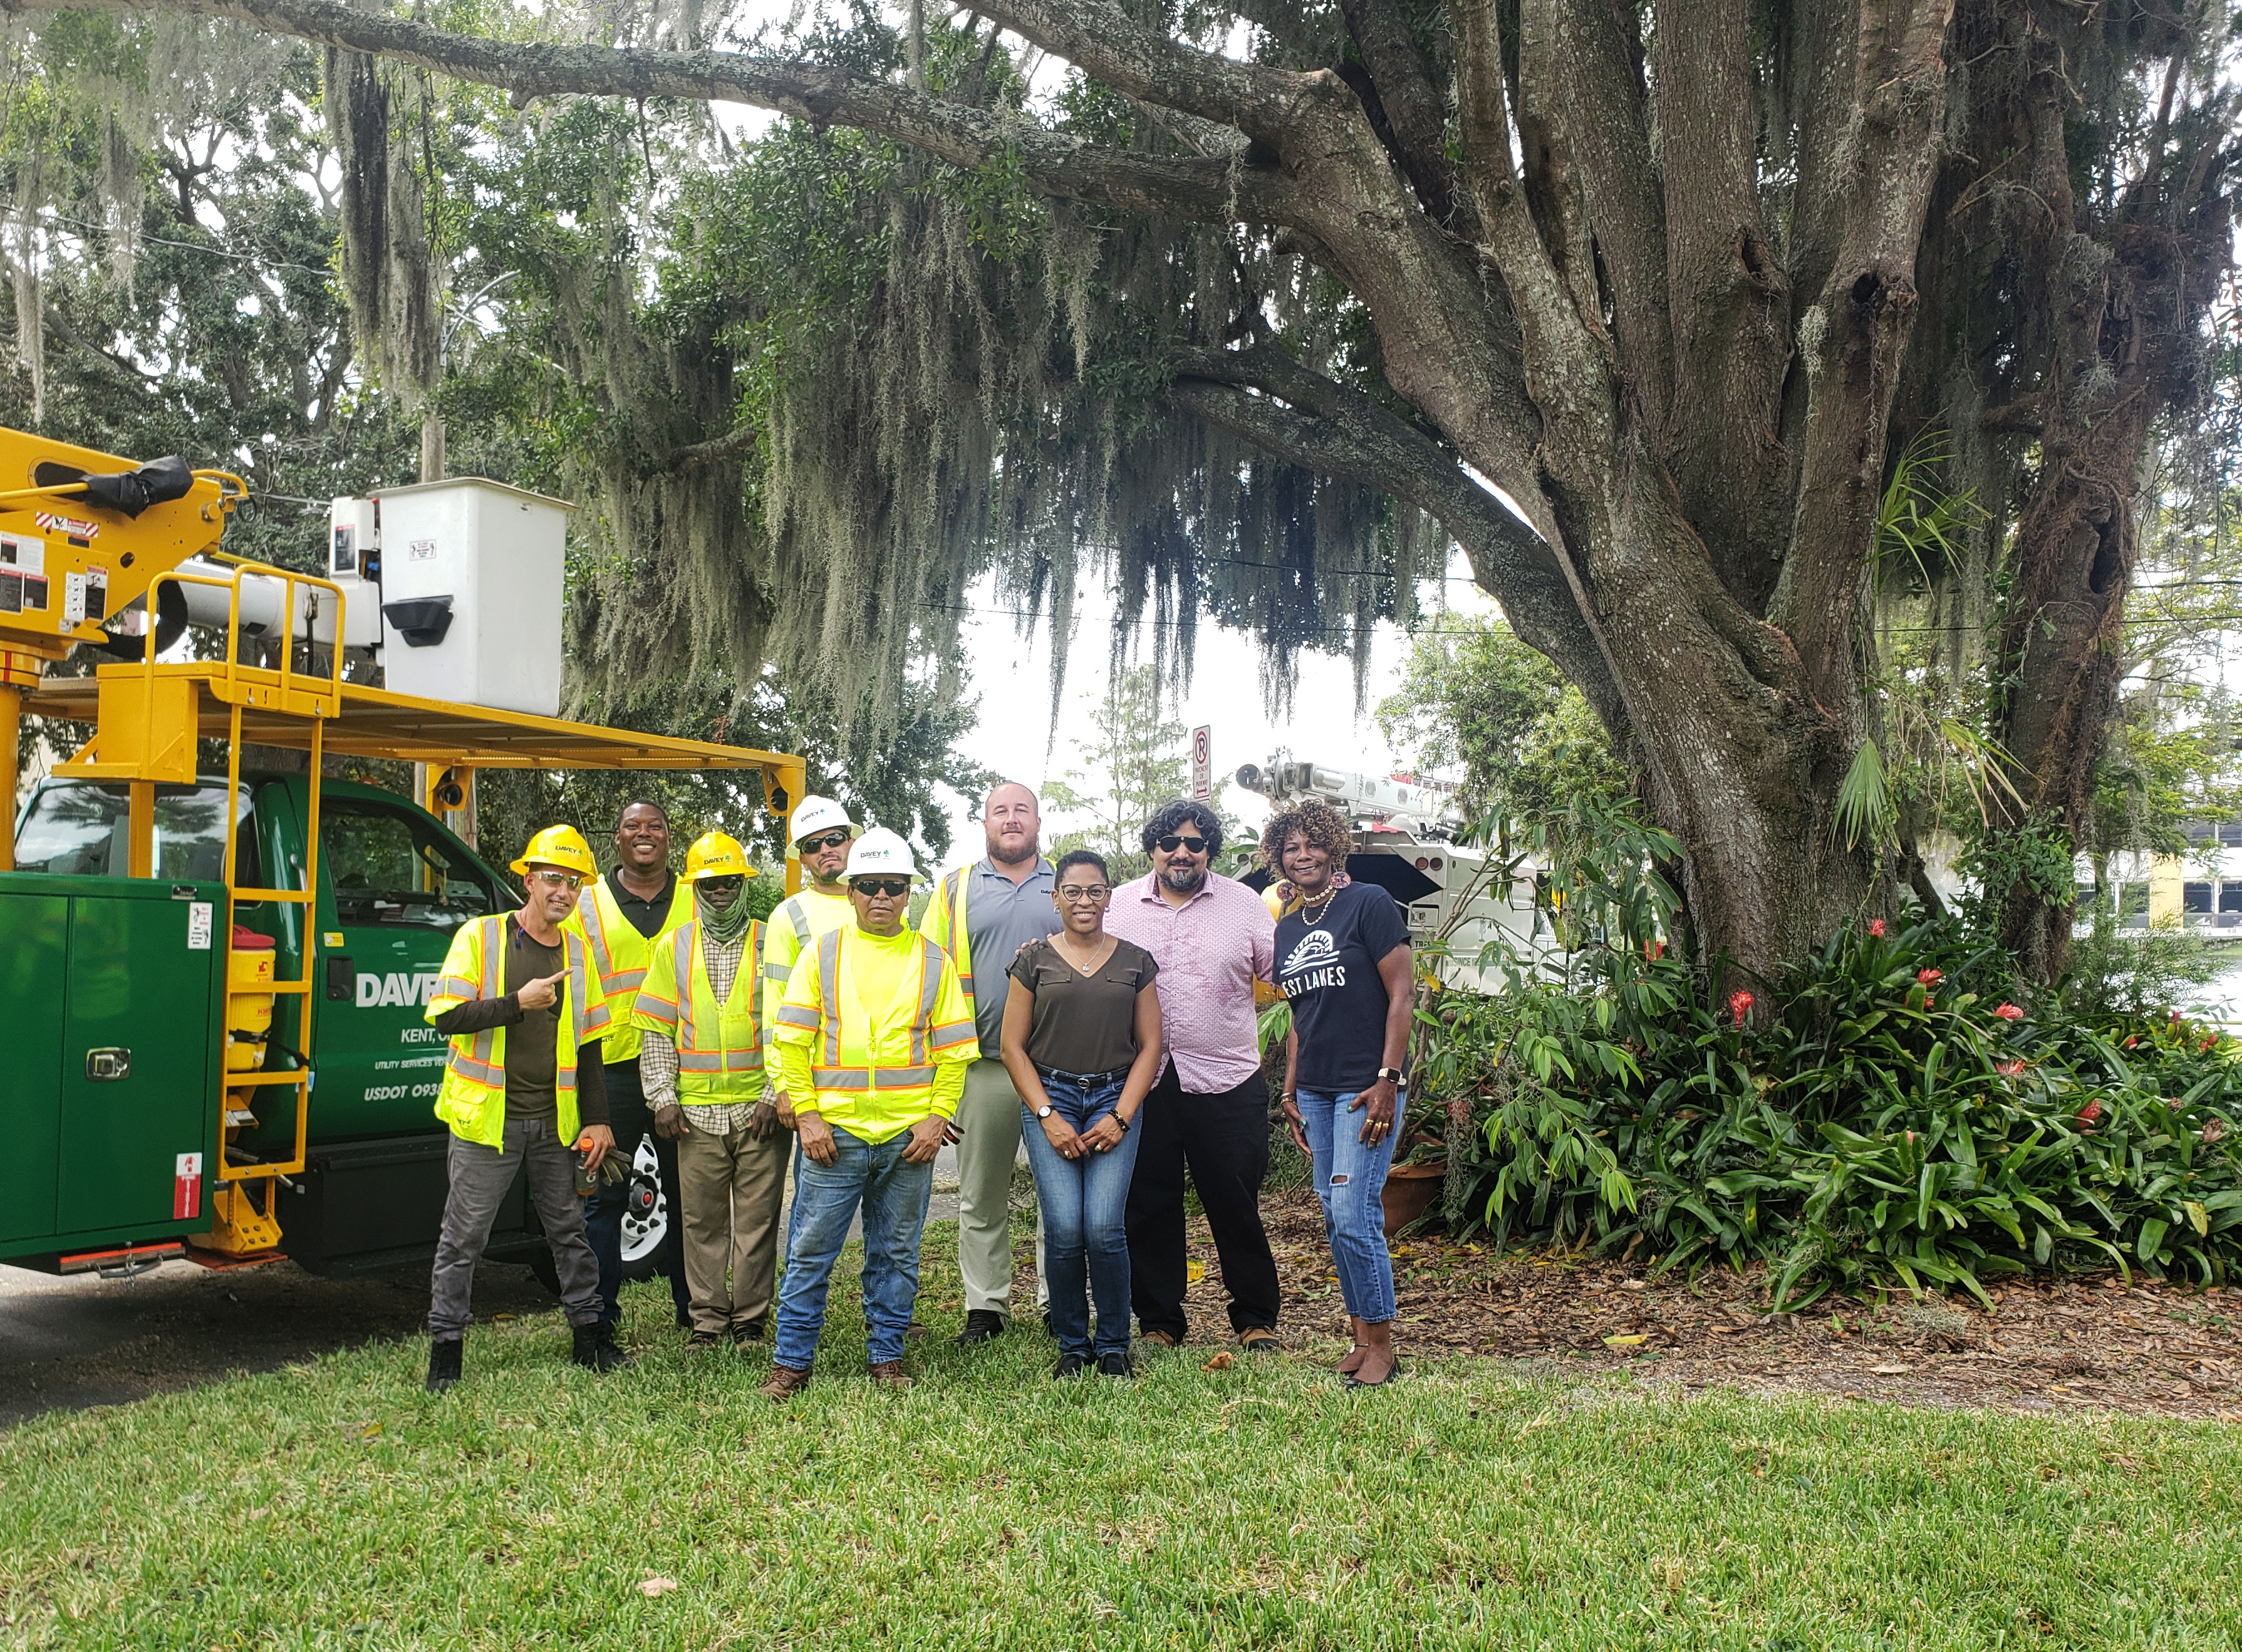 TNC and partners stand next to a tree pruning truck in Orlando, Florida.